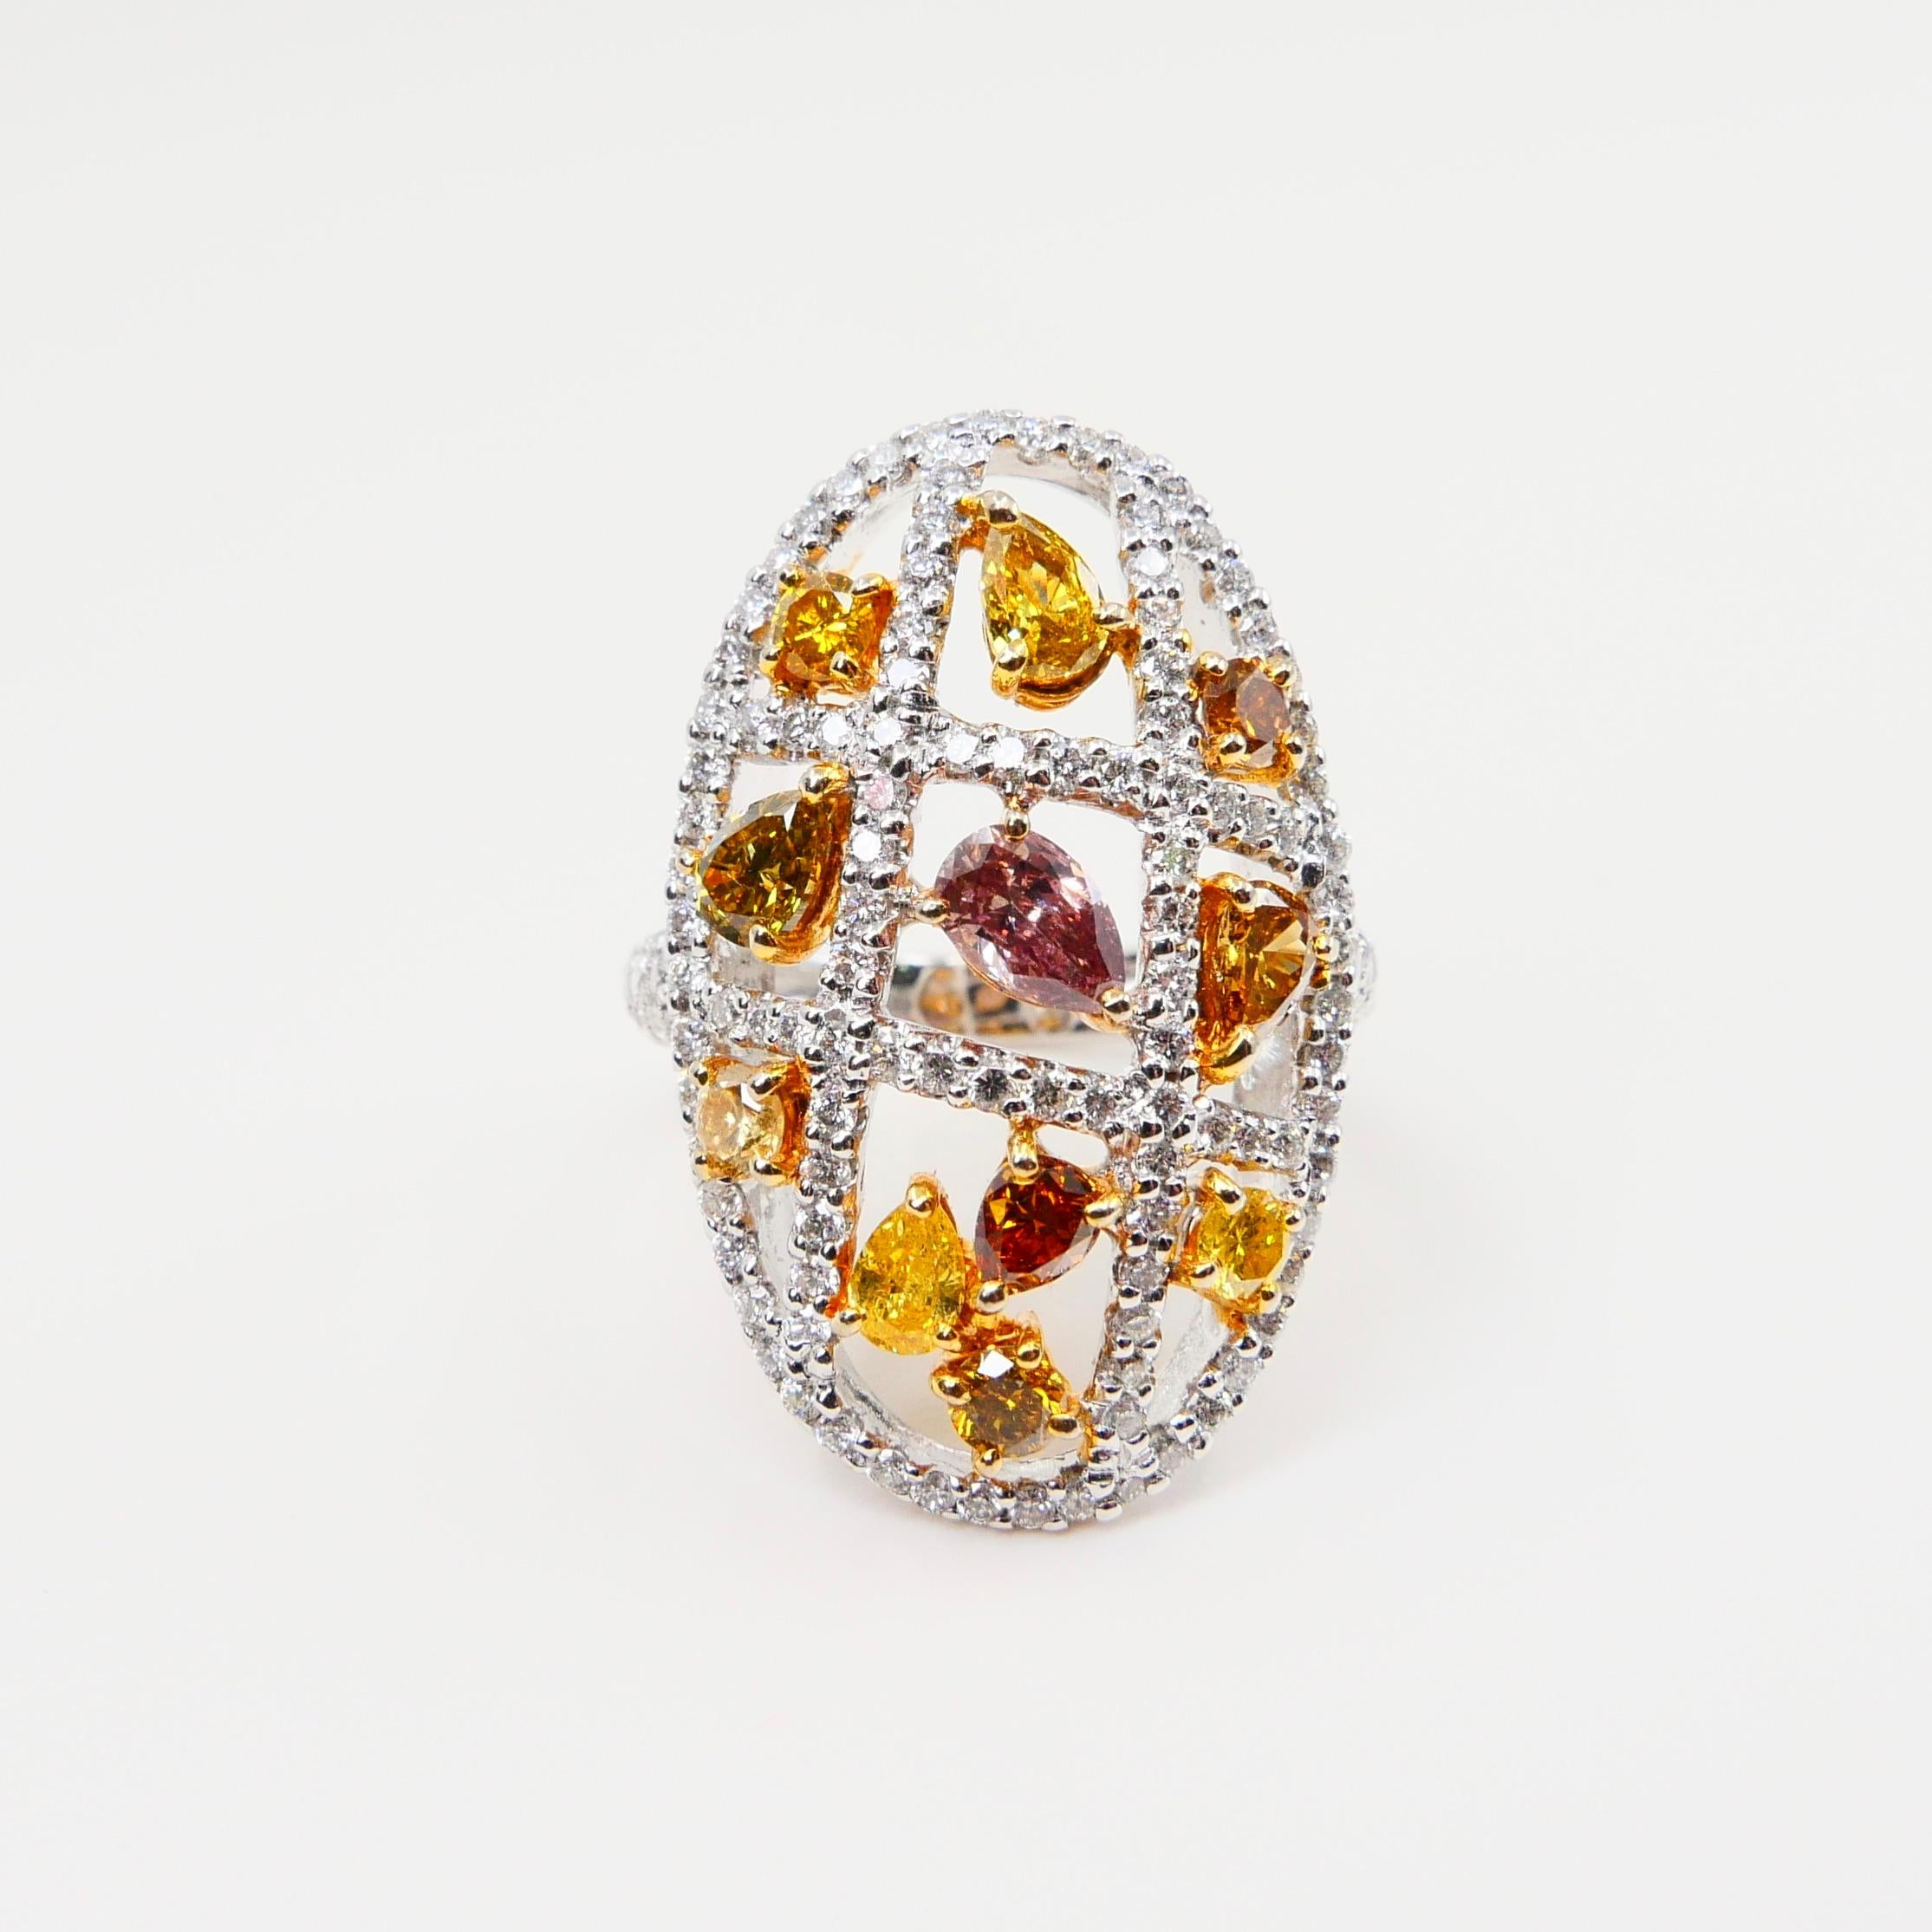 Pear Cut Fancy Color, Fancy Shaped Multicolored Diamond Cocktail Ring, Statement Piece For Sale